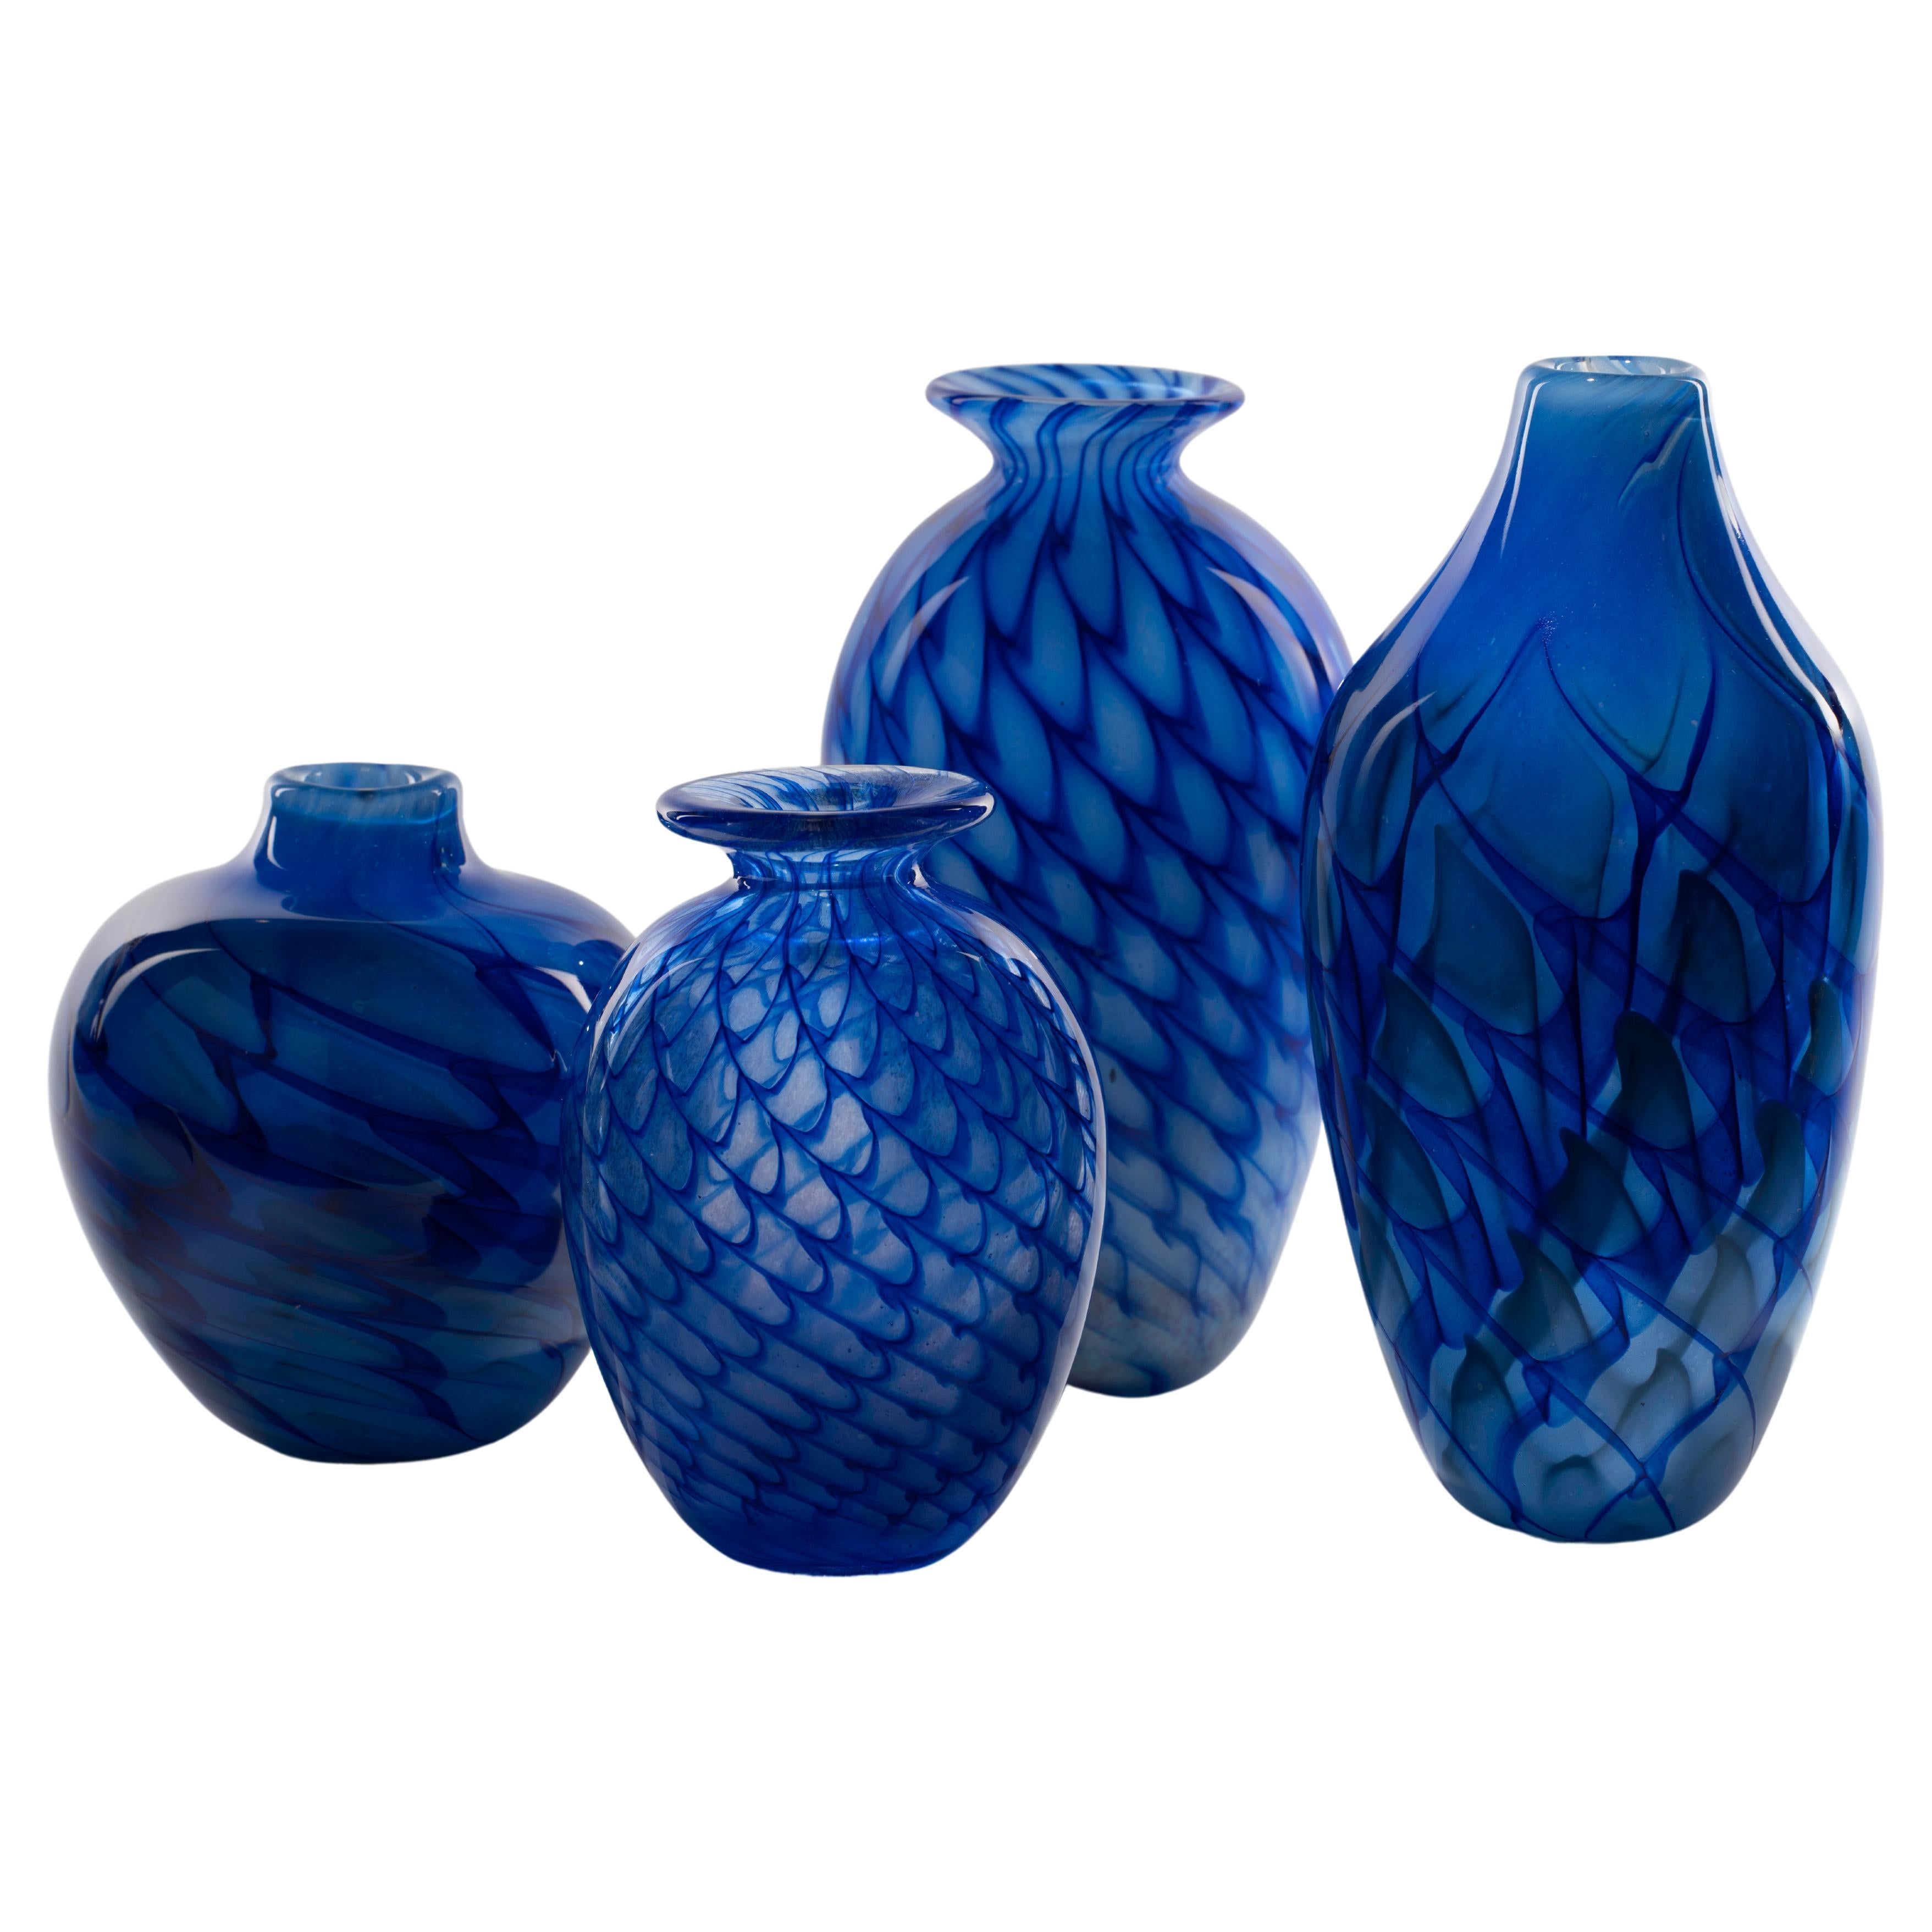 Blue Waves Collection, a Collection of Elegant Vases with Striking Lines